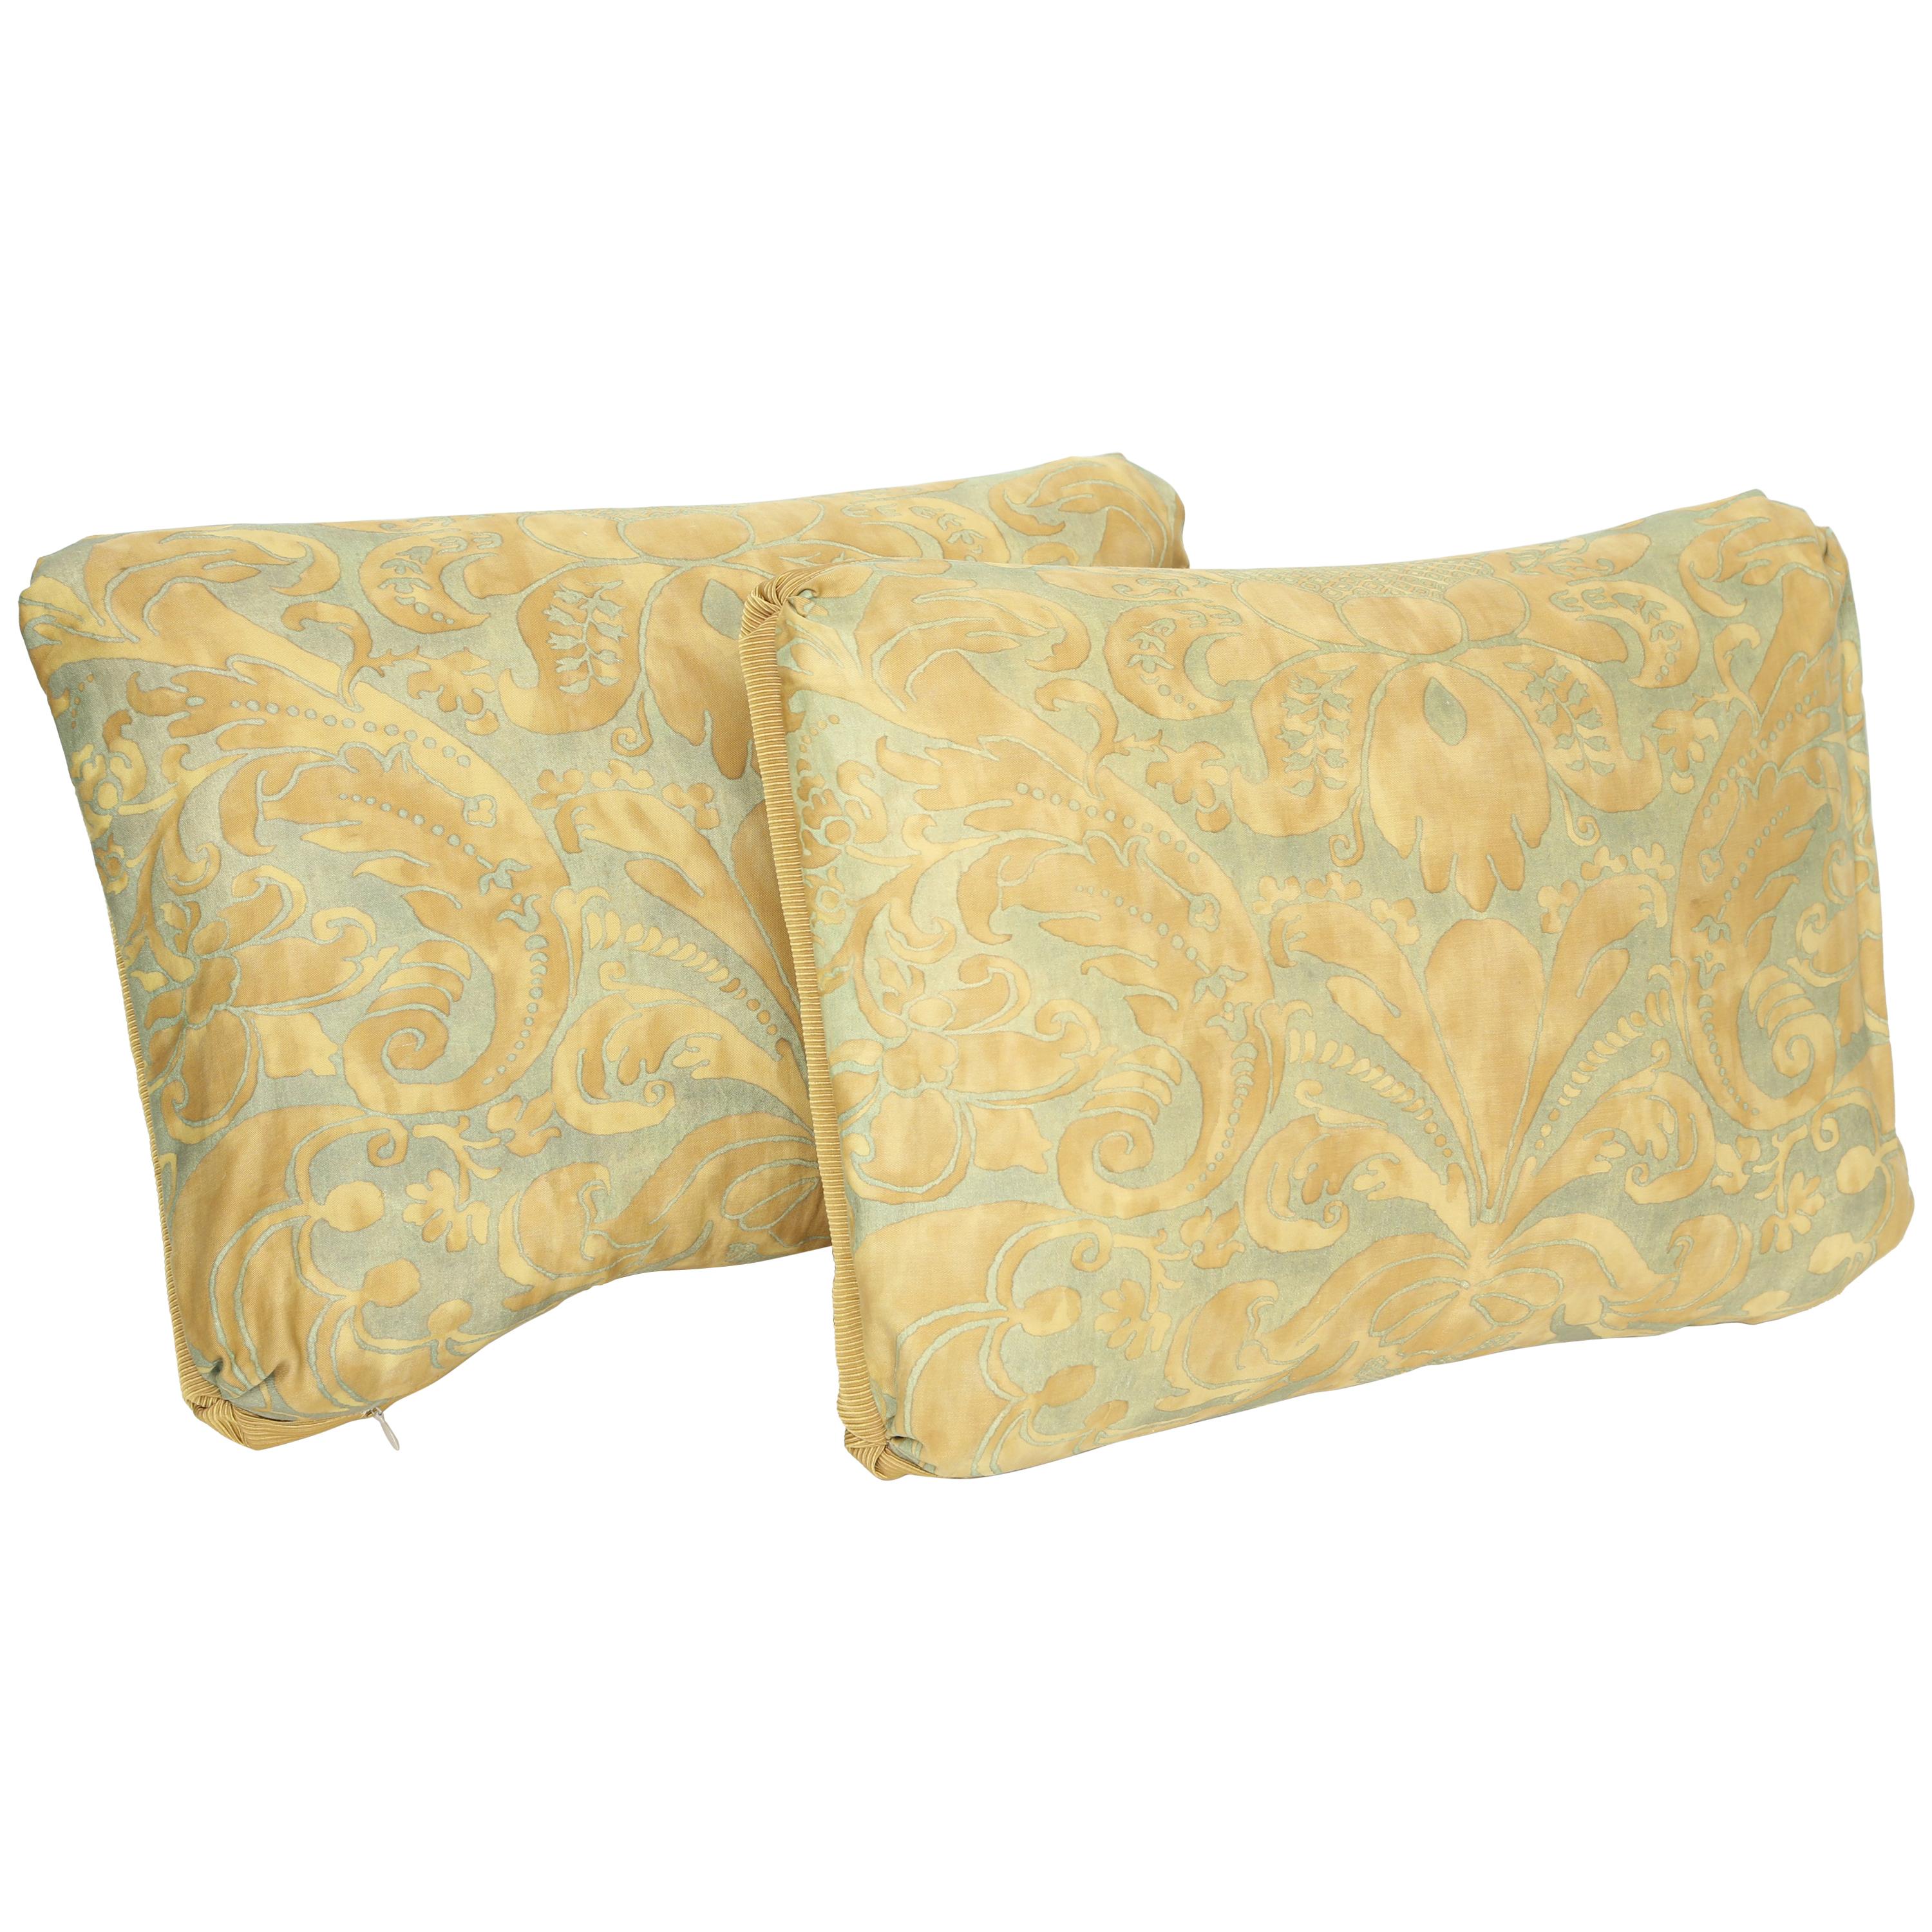  the "Caravaggio" Pattern by Fortuny, Oblong Cushions-A Pair